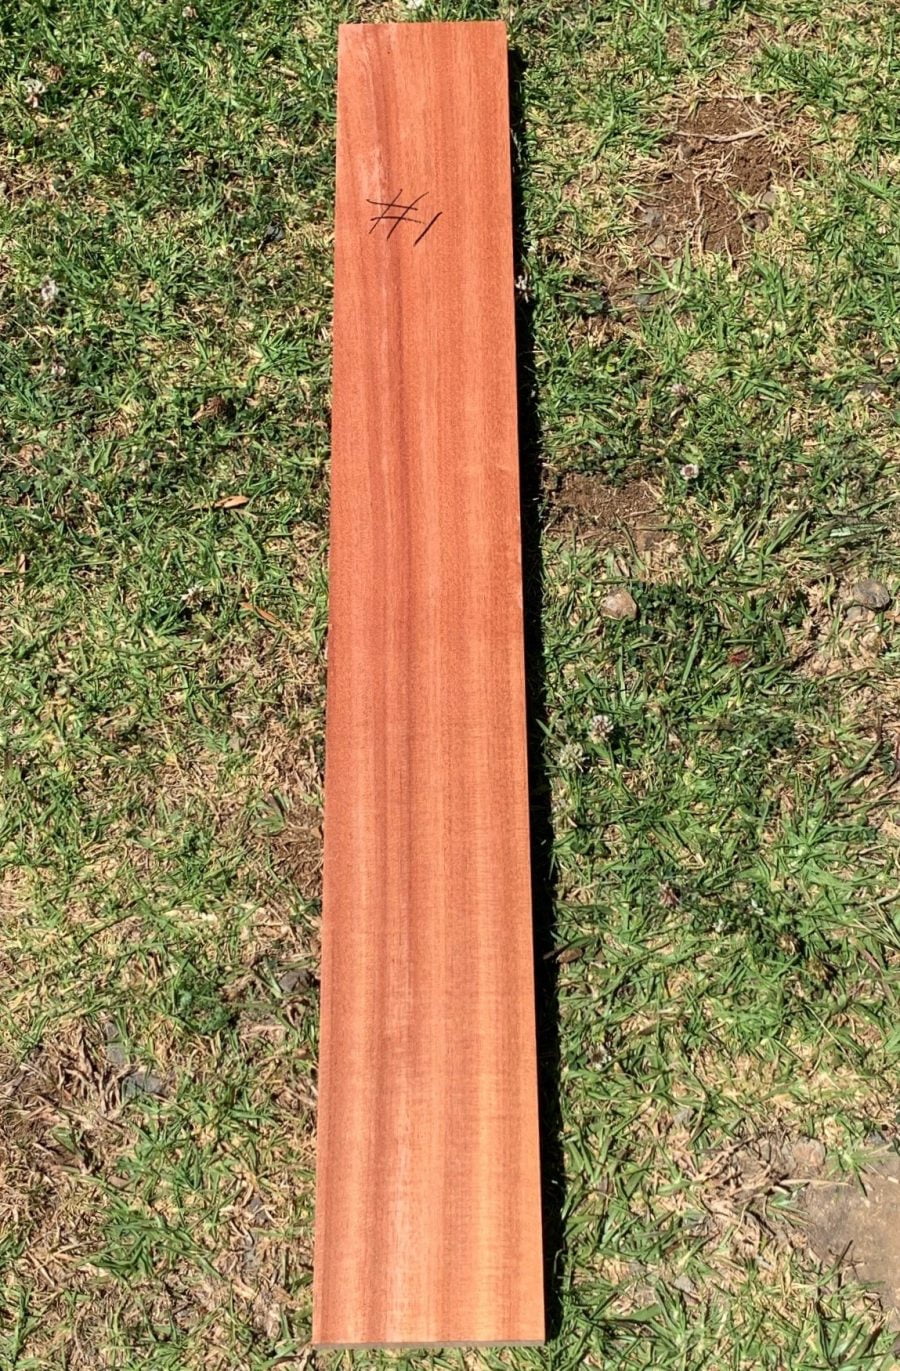 Australian timbers for musical instruments